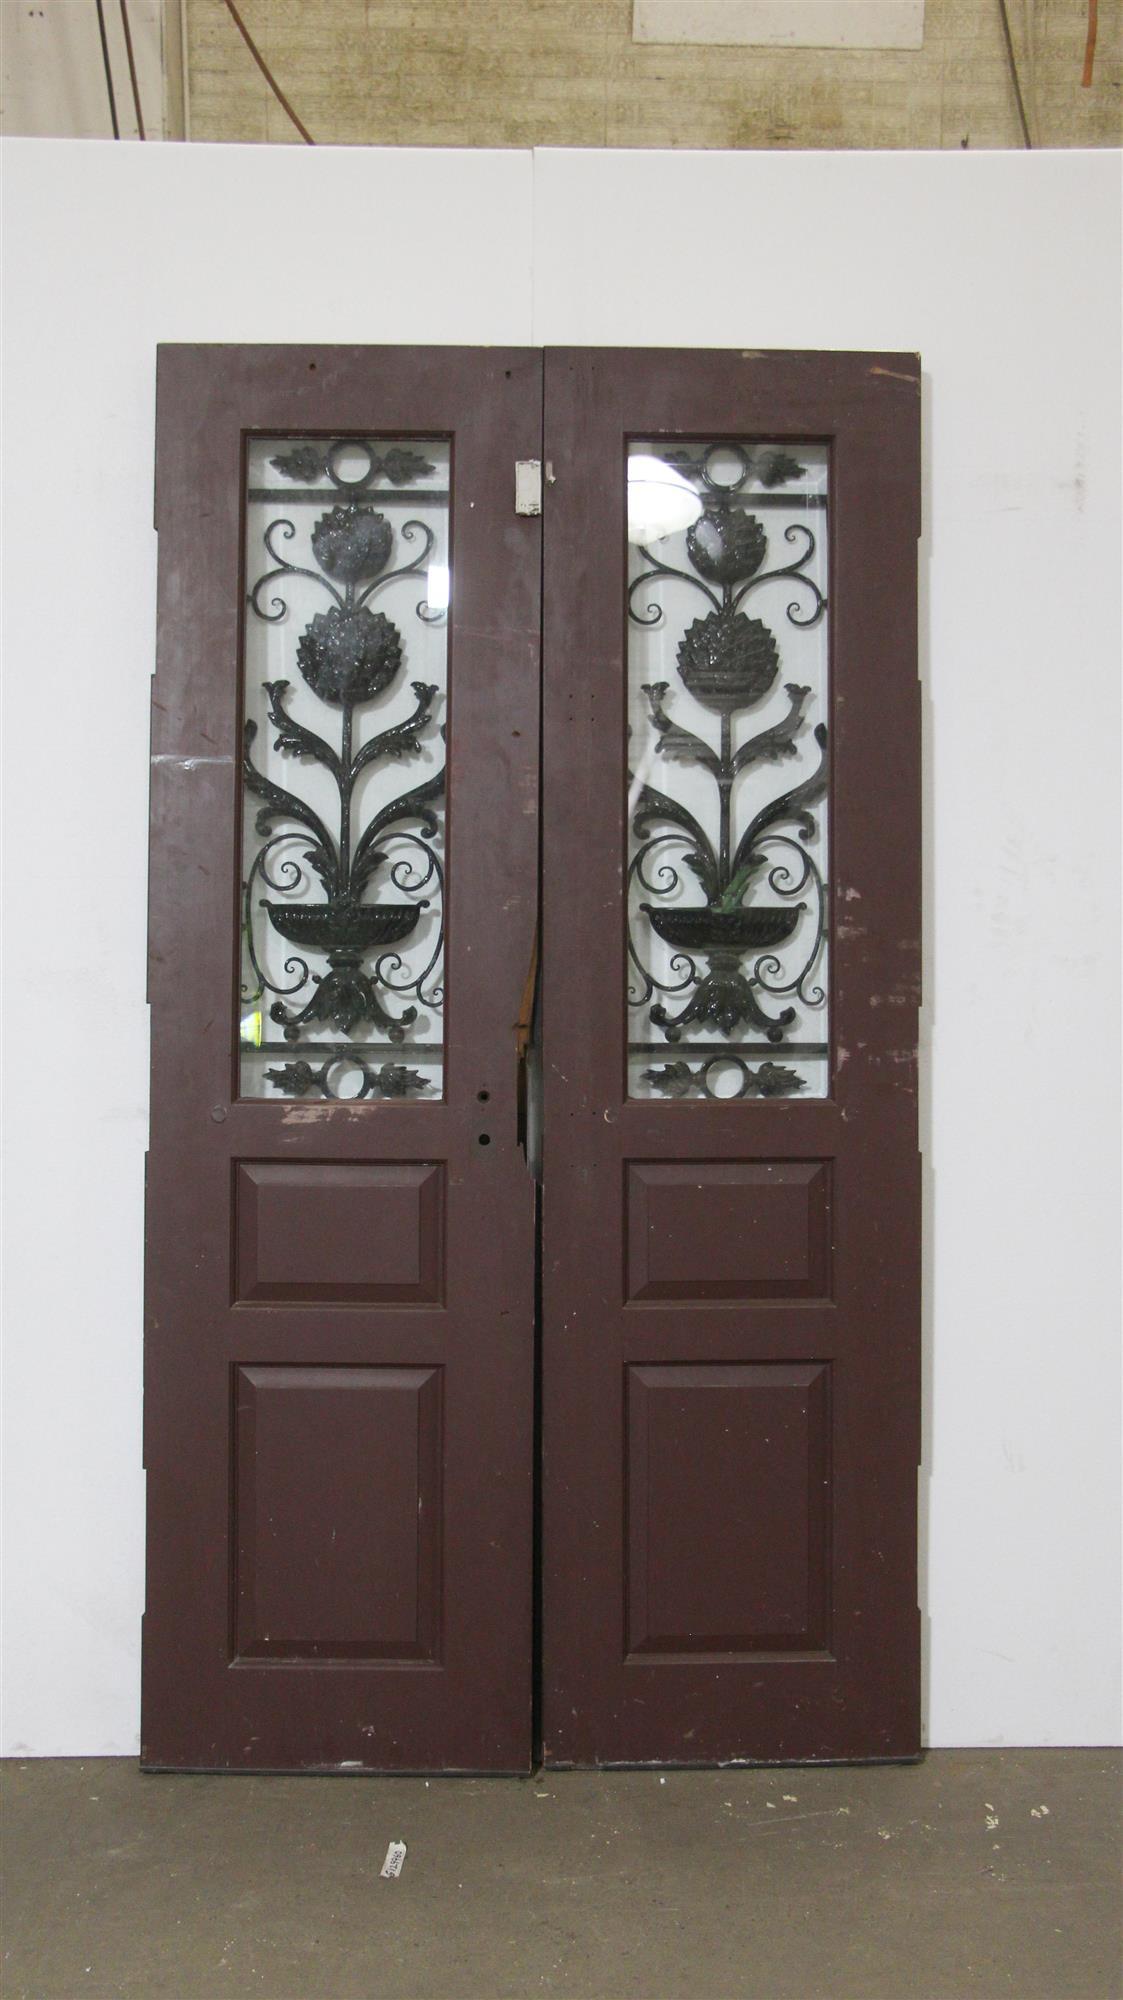 1940s Pair of Doors with Beveled Glass and New Wrought Iron Window Guards 2